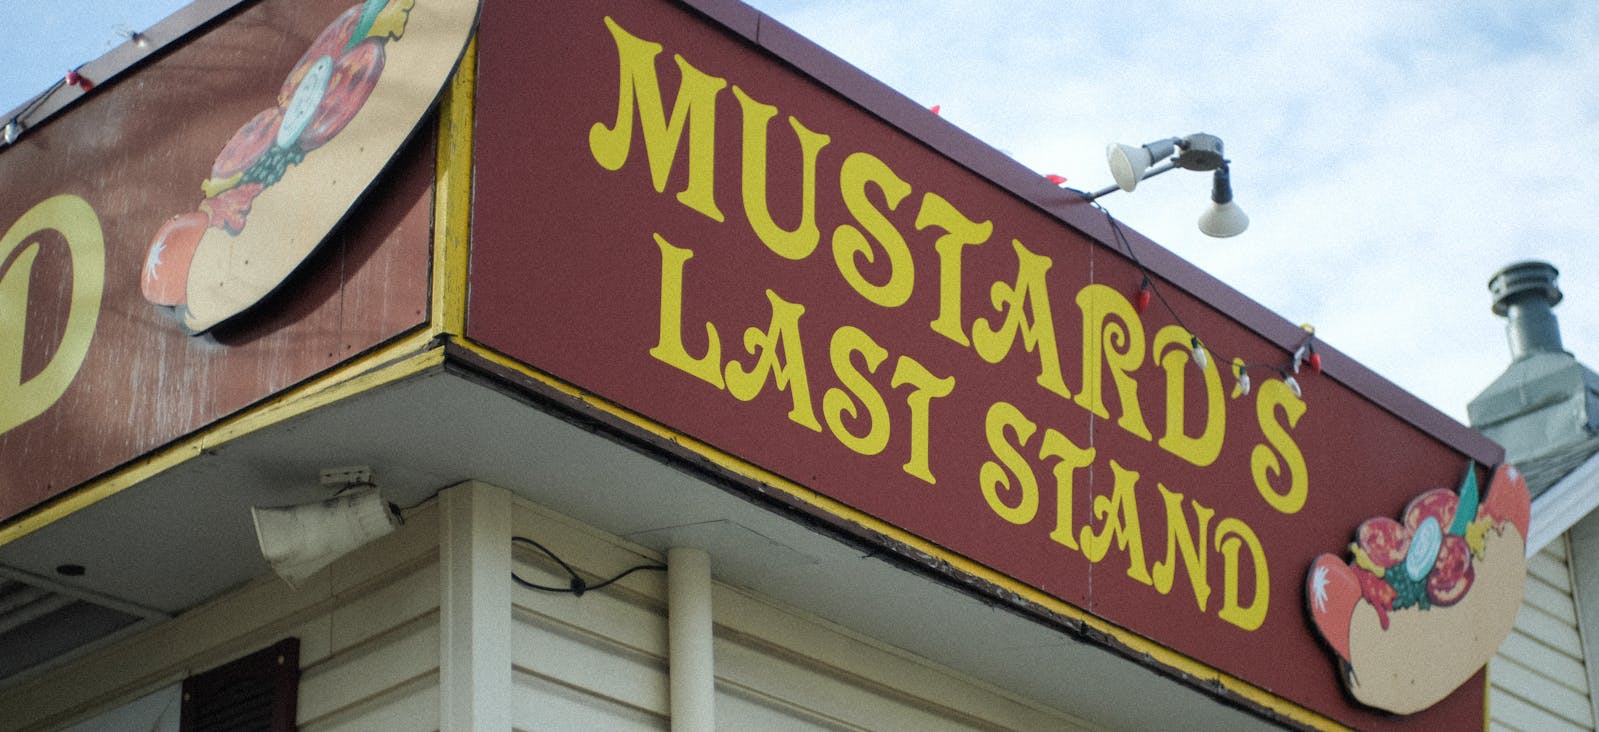 The exterior of Mustard's Last Stand in Denver, Colorado.